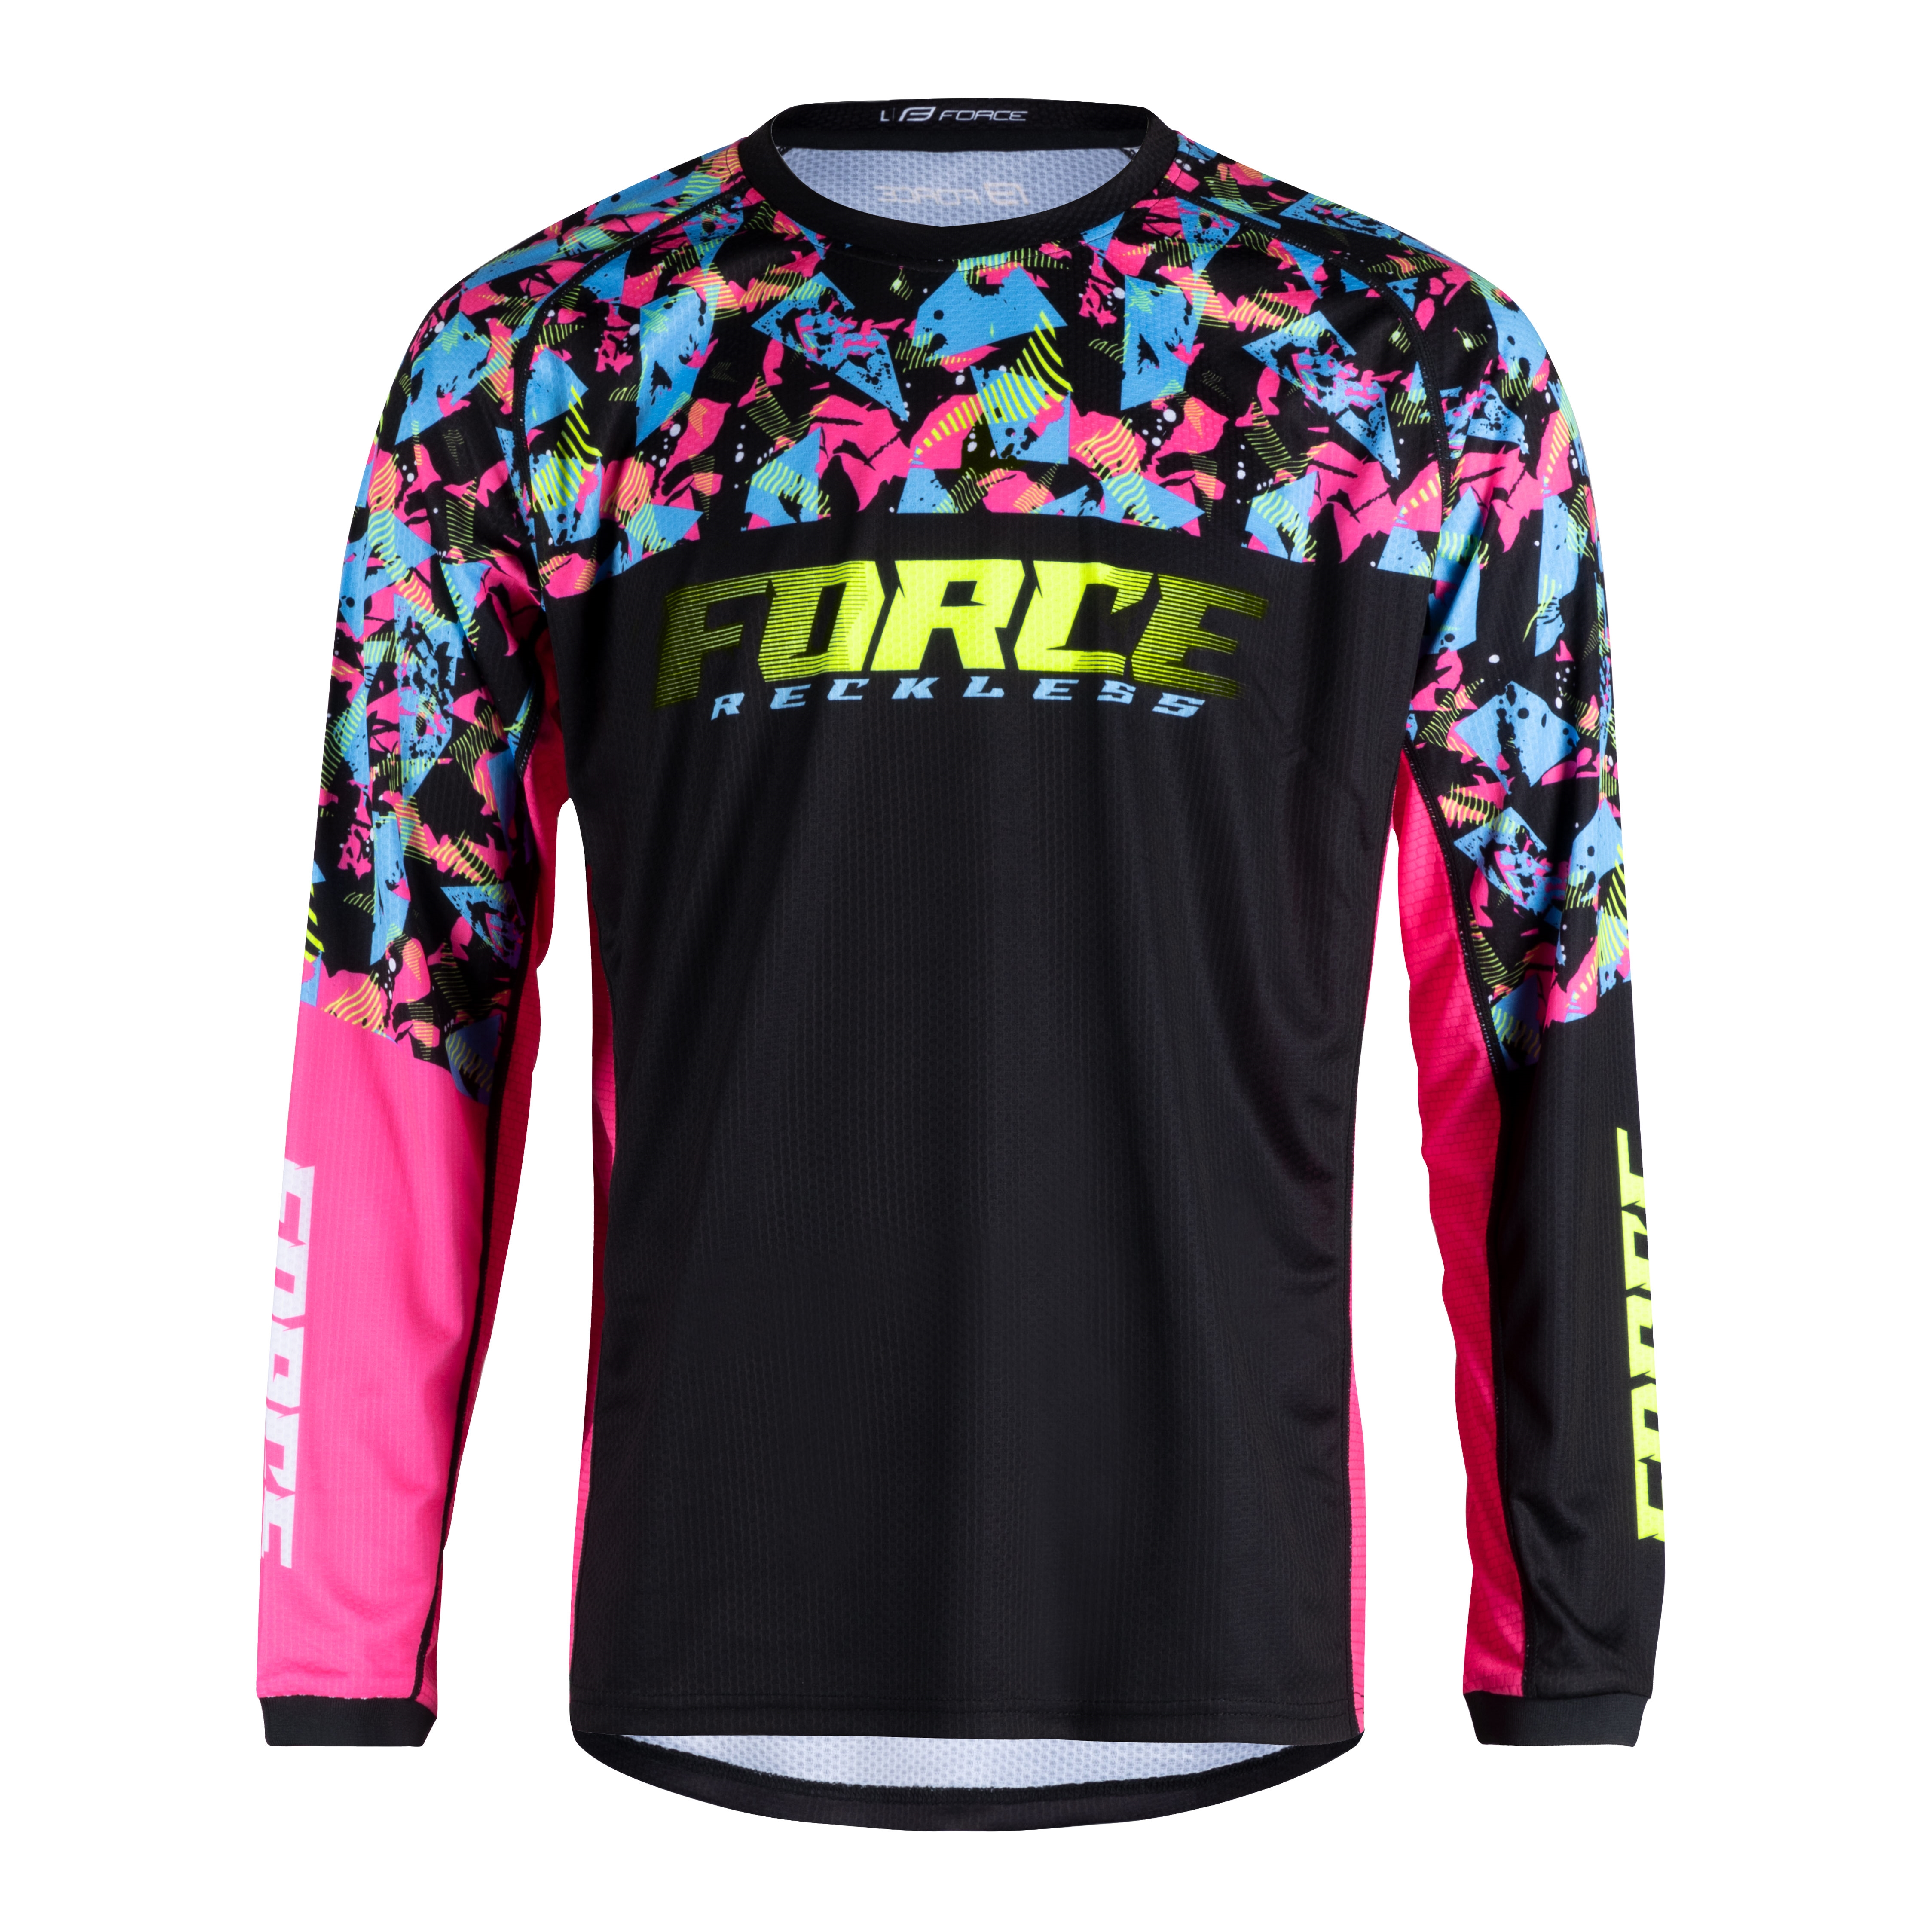 dres F RECKLESS dl. rukv, erno-rovo-fluo L